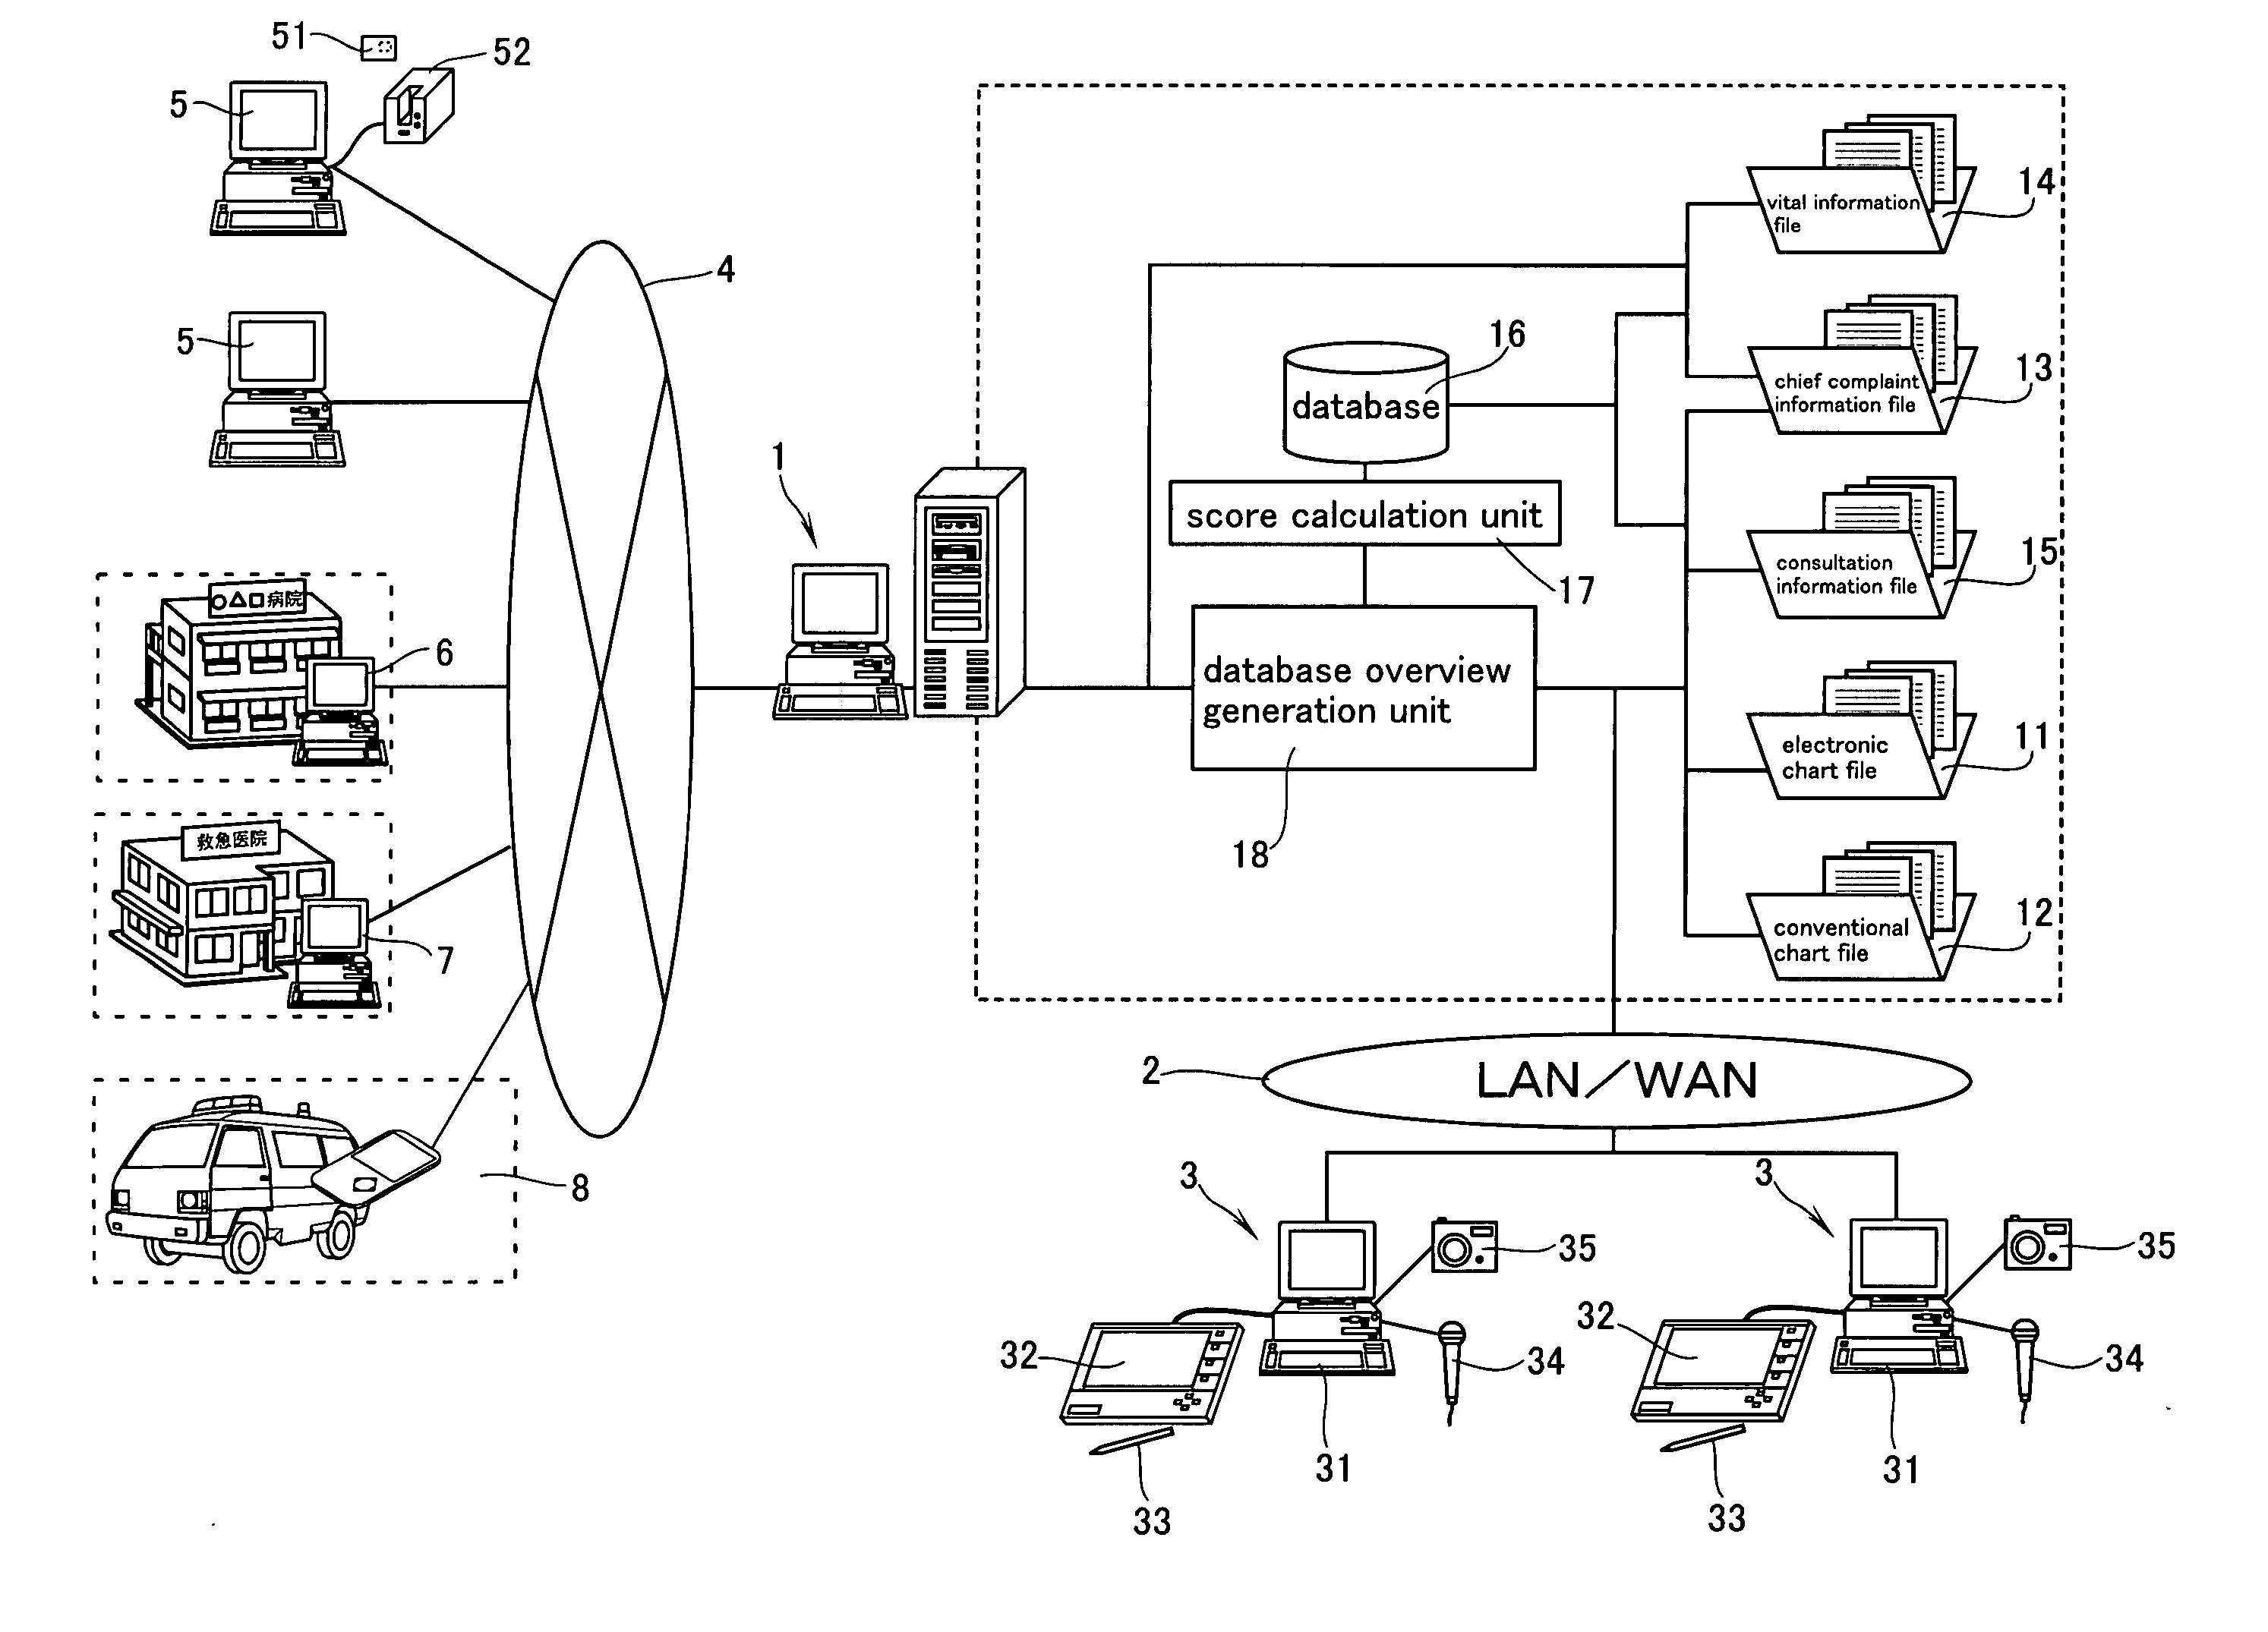 Electronic medical information system, electronic medical information programs, and computer-readable recording media for storing the electronic medical information